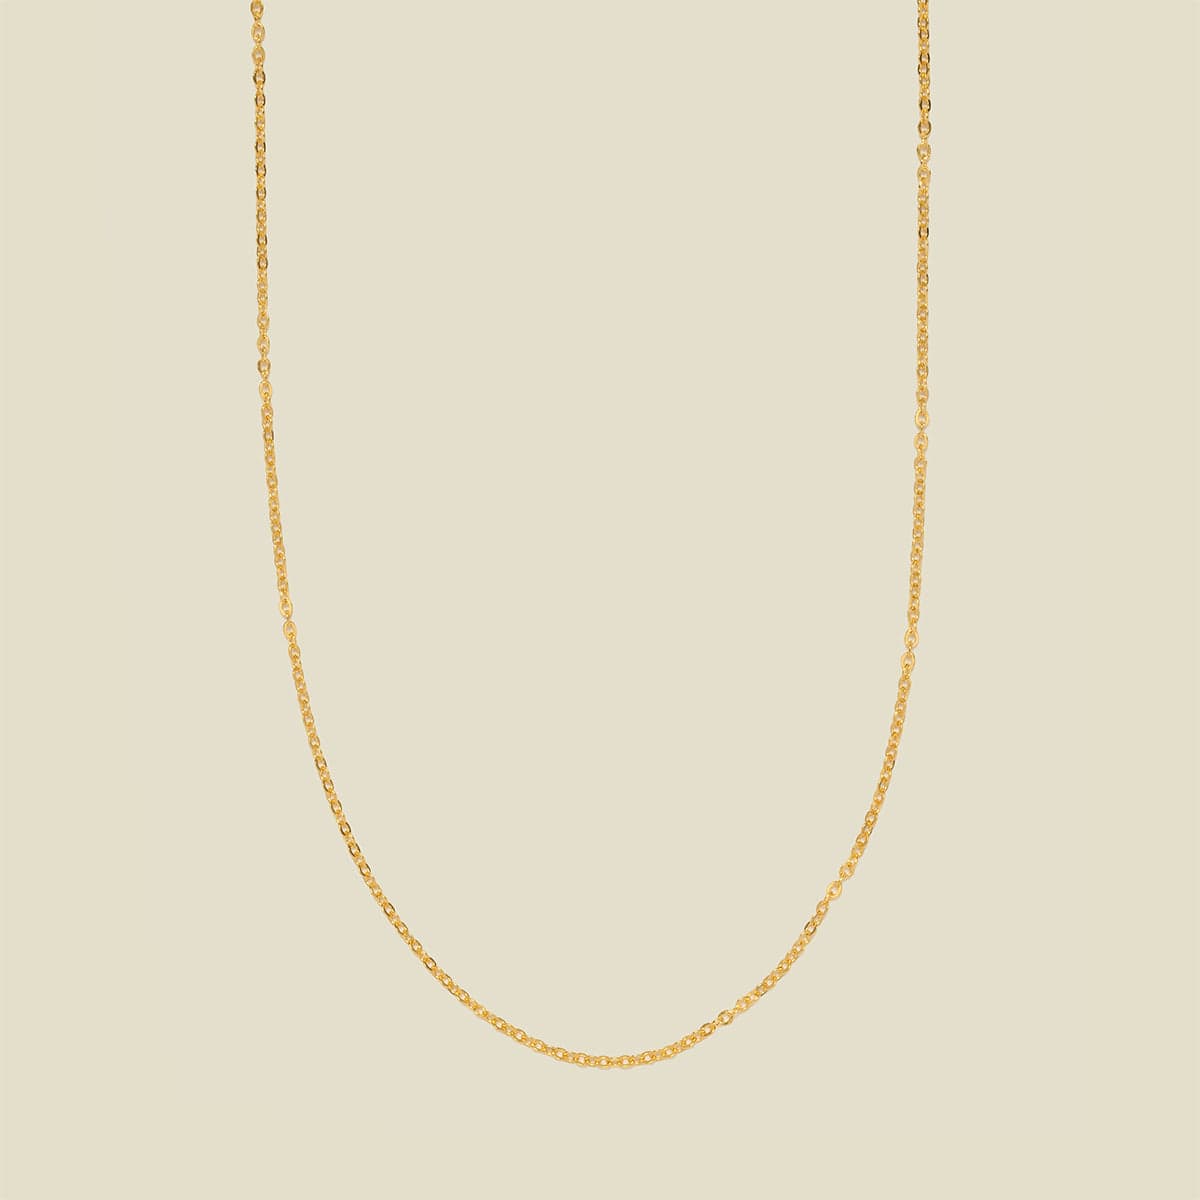 Non-Adjustable Flat Cable Chain | Final Sale Gold Filled / 1.2mm / 16" Necklace